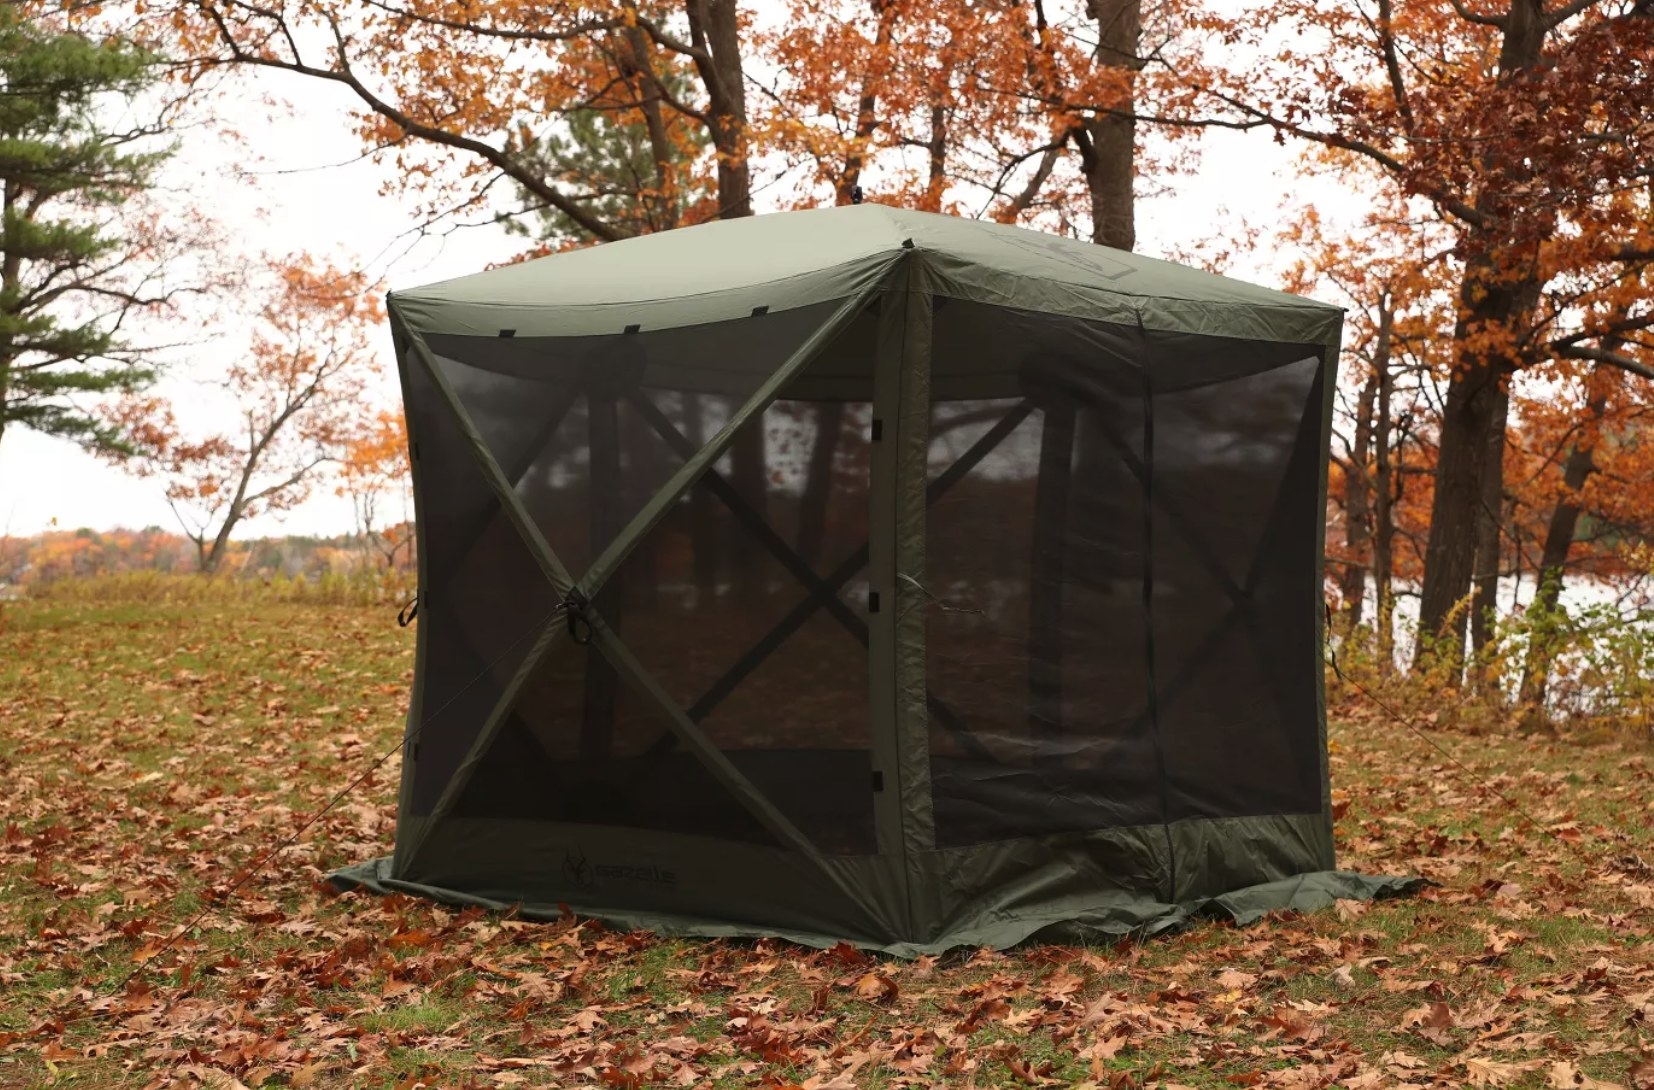 A large green tent with black screens in a field.